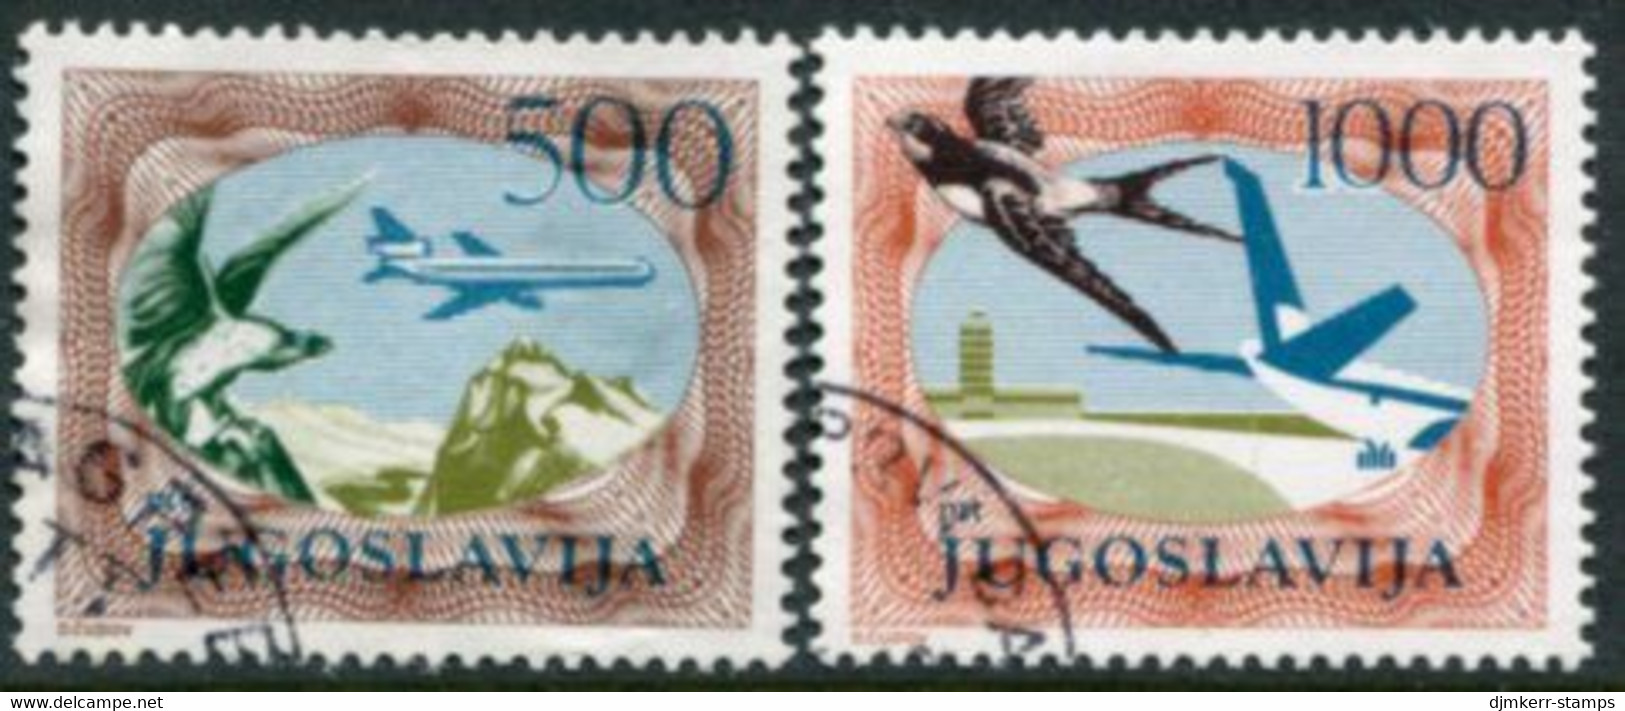 YUGOSLAVIA 1985 Airmail Definitive Perforated 12½ Used.  Michel 2098-99A - Usados